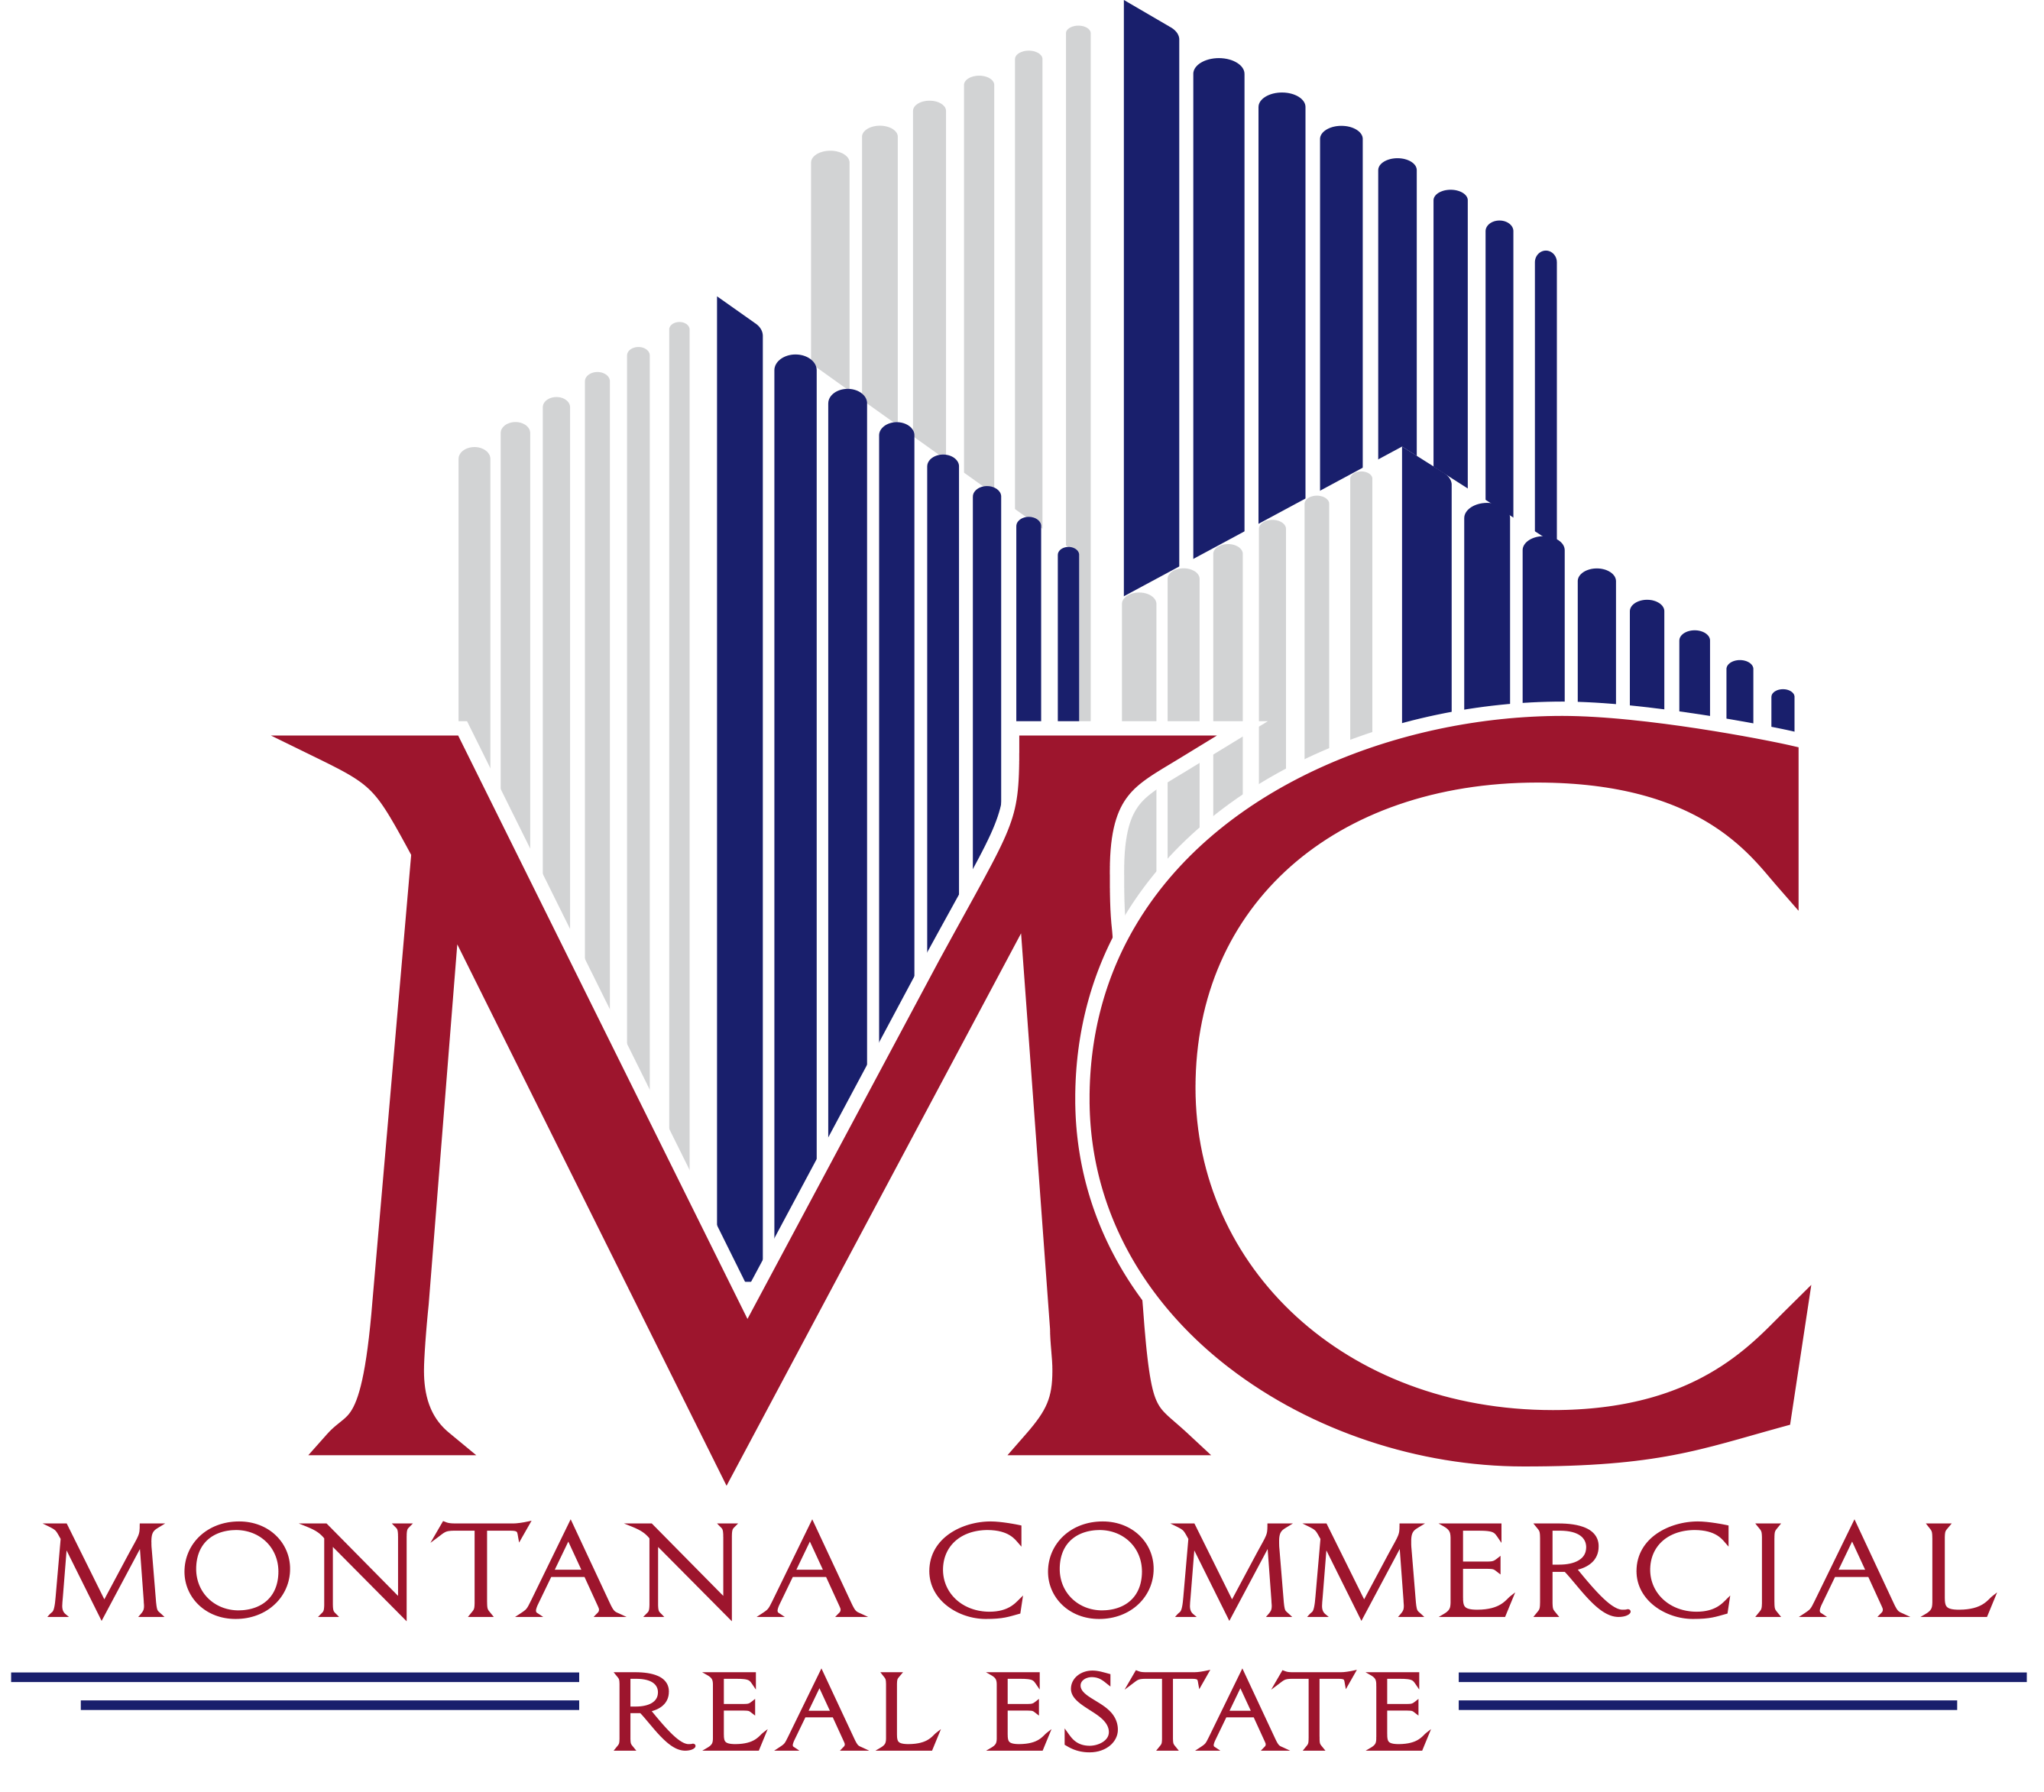 Montana Commercial Real Estate